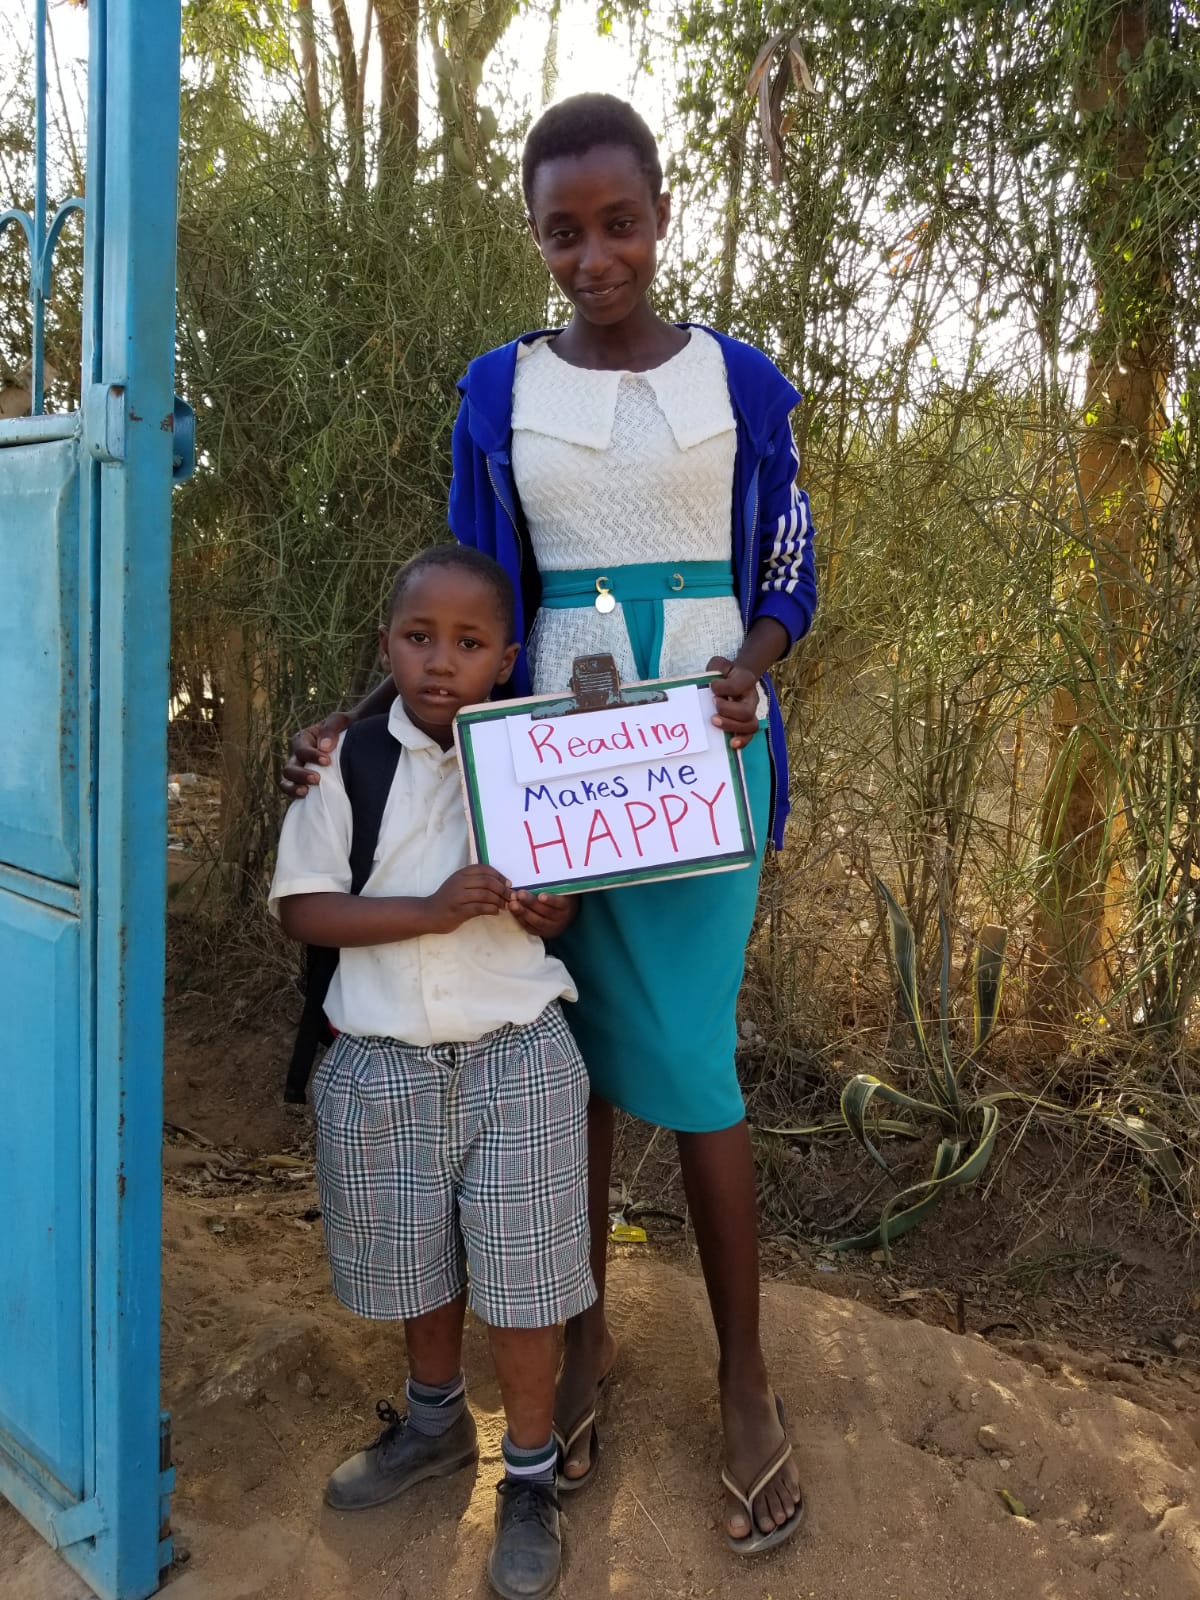 Child and mother in Kenya with sign